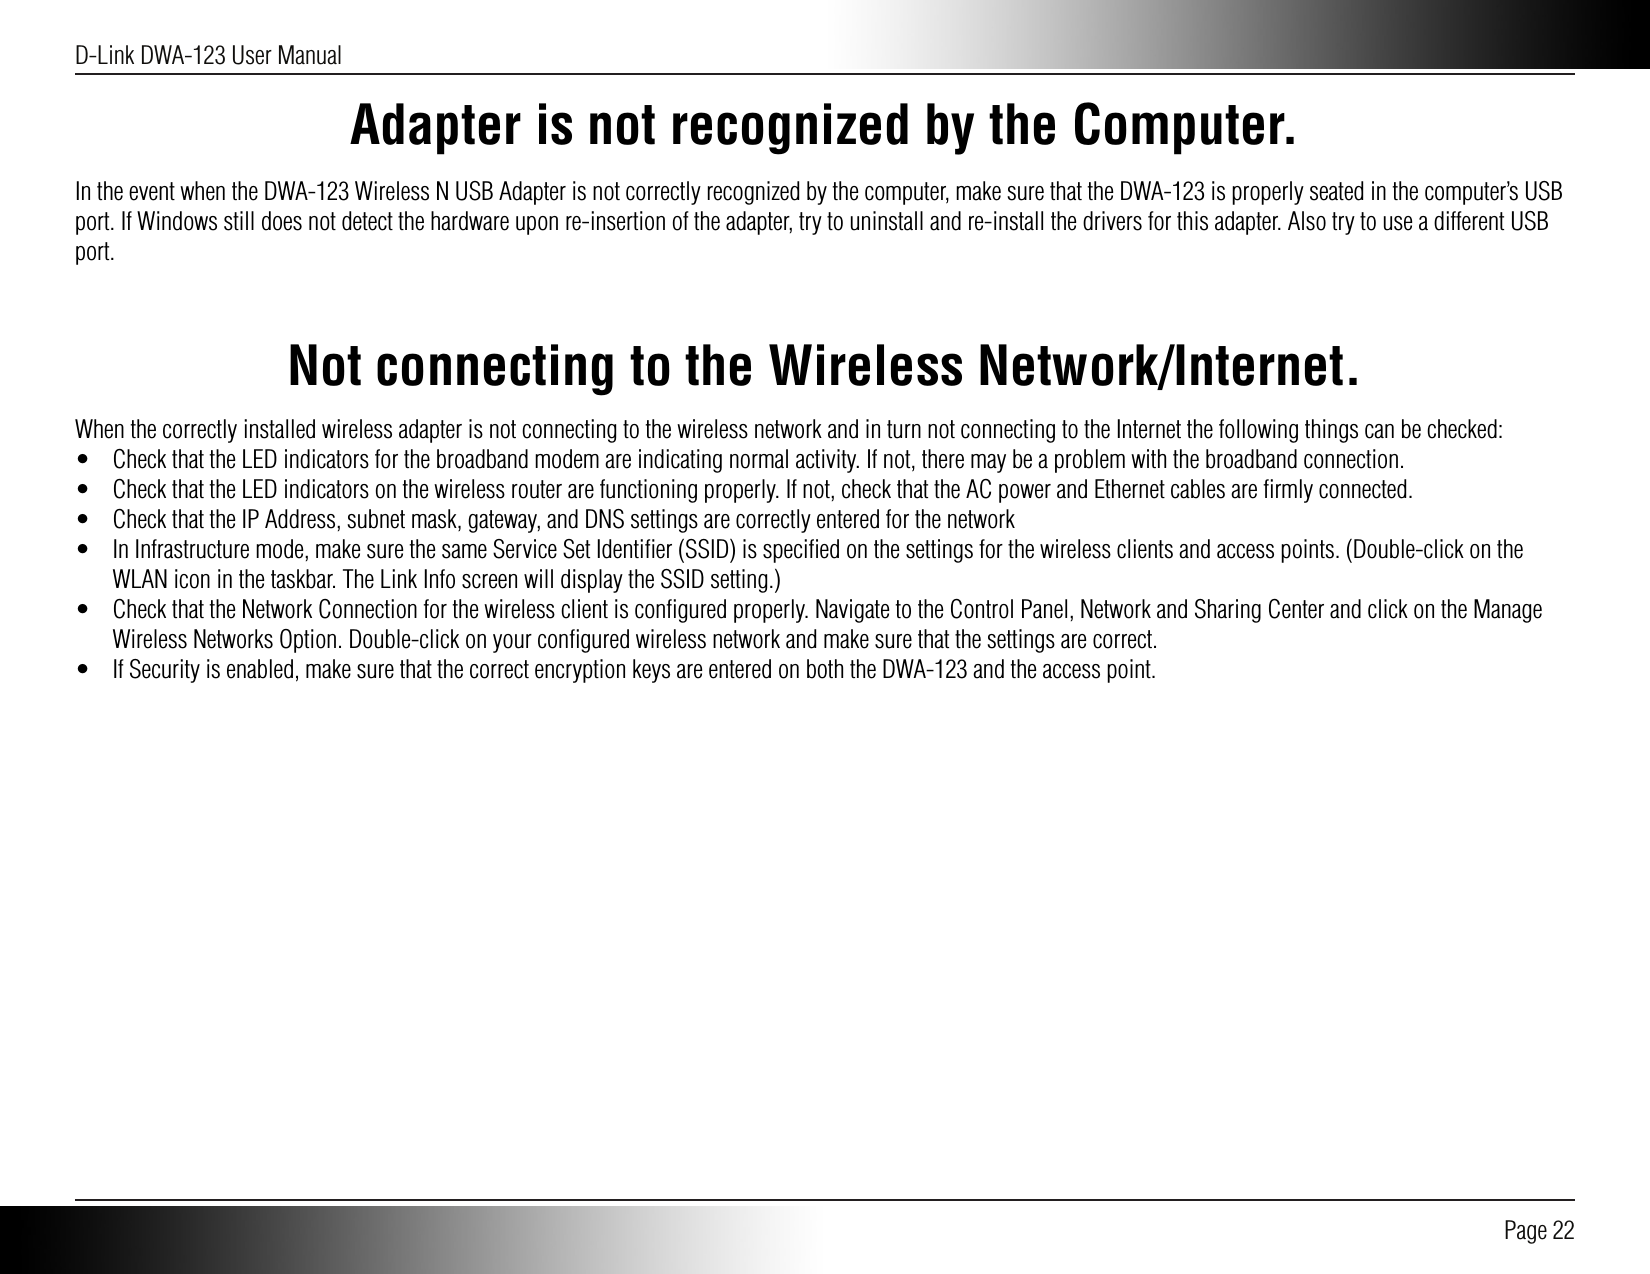 D-Link DWA-123 User Manual Page 22Adapter is not recognized by the Computer.In the event when the DWA-123 Wireless N USB Adapter is not correctly recognized by the computer, make sure that the DWA-123 is properly seated in the computer’s USB port. If Windows still does not detect the hardware upon re-insertion of the adapter, try to uninstall and re-install the drivers for this adapter. Also try to use a different USB port.Not connecting to the Wireless Network/Internet.When the correctly installed wireless adapter is not connecting to the wireless network and in turn not connecting to the Internet the following things can be checked:•  Check that the LED indicators for the broadband modem are indicating normal activity. If not, there may be a problem with the broadband connection.•  Check that the LED indicators on the wireless router are functioning properly. If not, check that the AC power and Ethernet cables are ﬁrmly connected.•  Check that the IP Address, subnet mask, gateway, and DNS settings are correctly entered for the network•  In Infrastructure mode, make sure the same Service Set Identiﬁer (SSID) is speciﬁed on the settings for the wireless clients and access points. (Double-click on the WLAN icon in the taskbar. The Link Info screen will display the SSID setting.)•  Check that the Network Connection for the wireless client is conﬁgured properly. Navigate to the Control Panel, Network and Sharing Center and click on the Manage Wireless Networks Option. Double-click on your conﬁgured wireless network and make sure that the settings are correct.•  If Security is enabled, make sure that the correct encryption keys are entered on both the DWA-123 and the access point. 